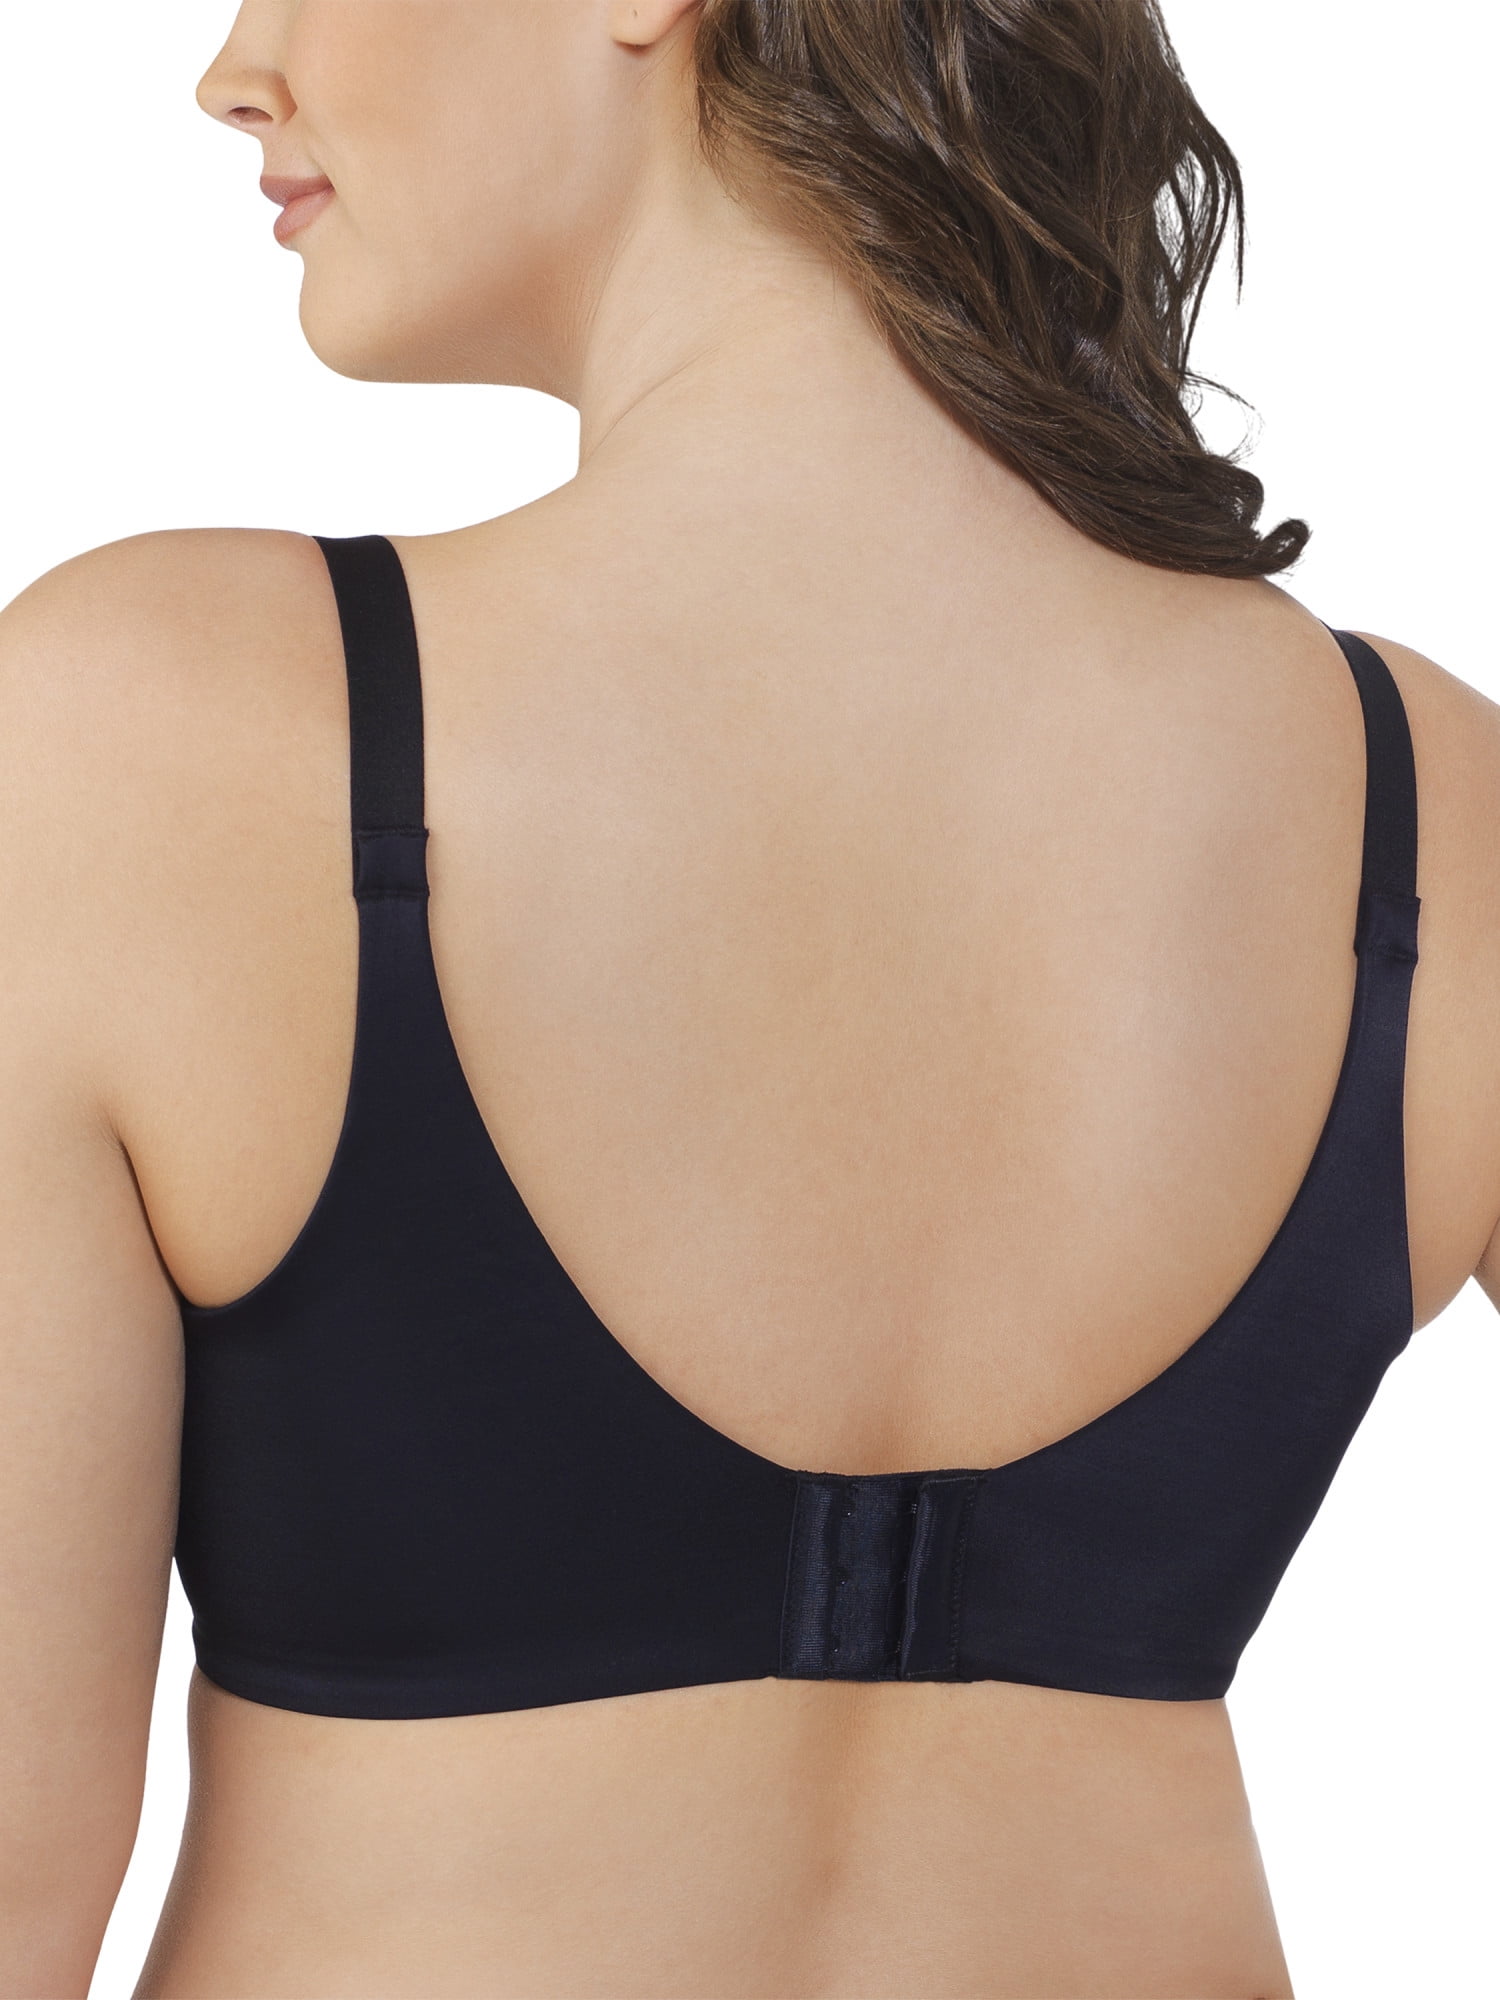 Curvation Bras Products and Reviews – CurvationBras.org